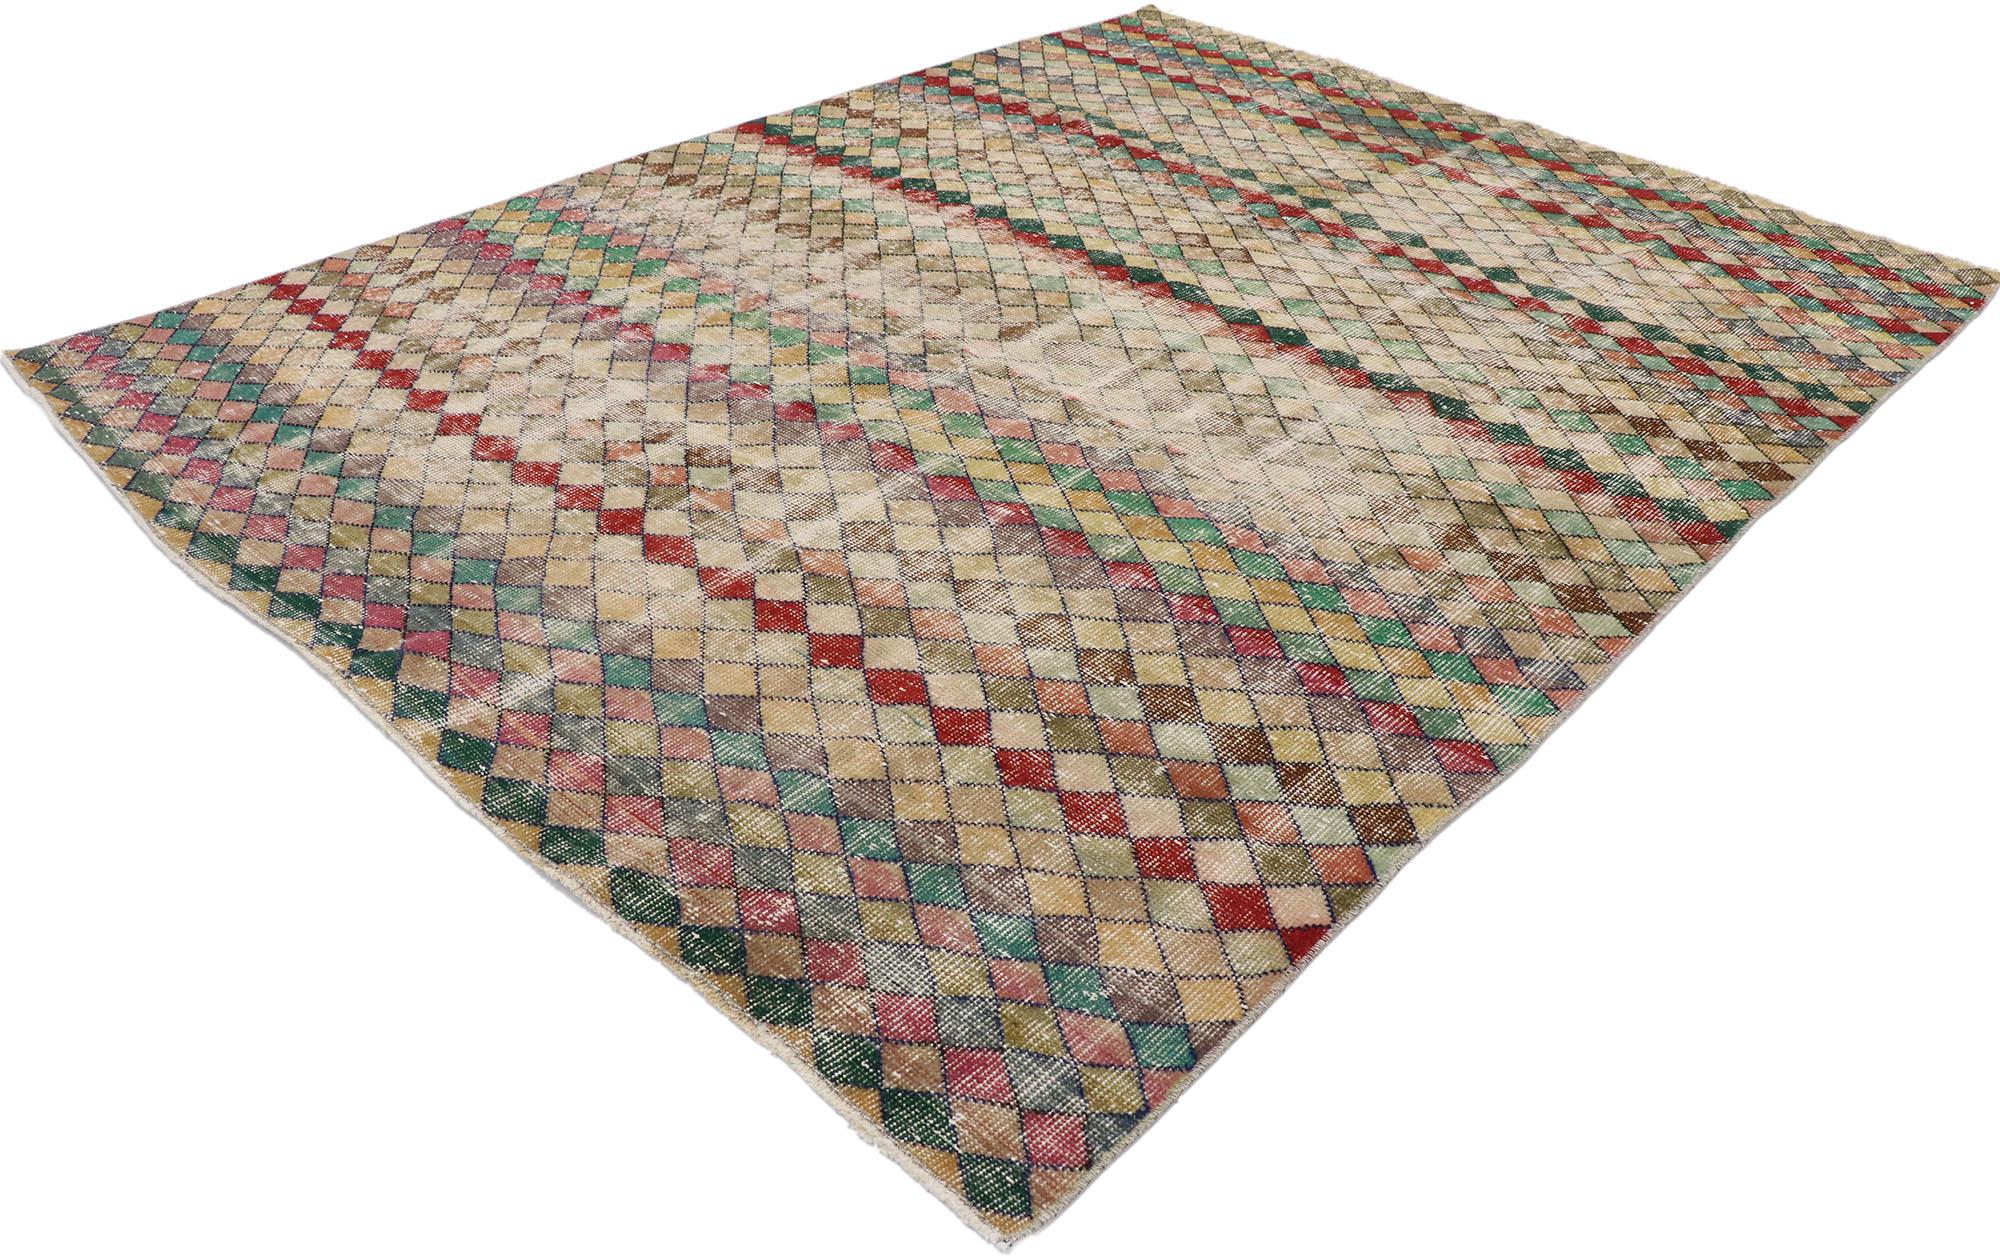 53322, distressed vintage Turkish Sivas rug with Rustic Mid-Century Modern style. This hand knotted wool distressed vintage Turkish Sivas rug features an all-over checkerboard pattern comprised of multicolored diamonds. Gentle waves of abrash and